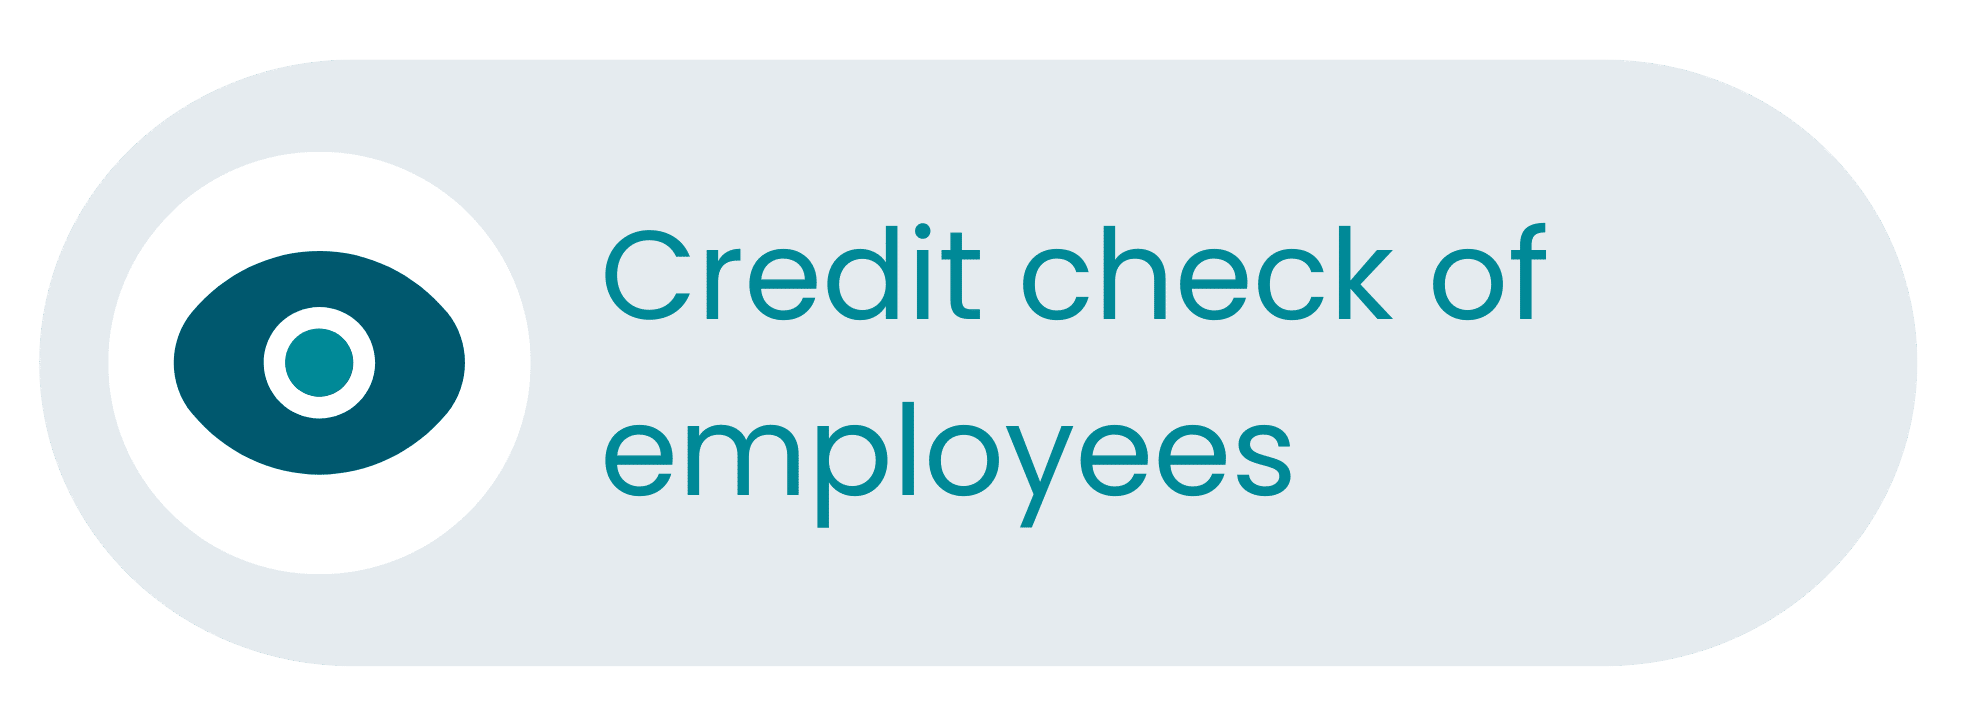 Icon of credit check of employees.